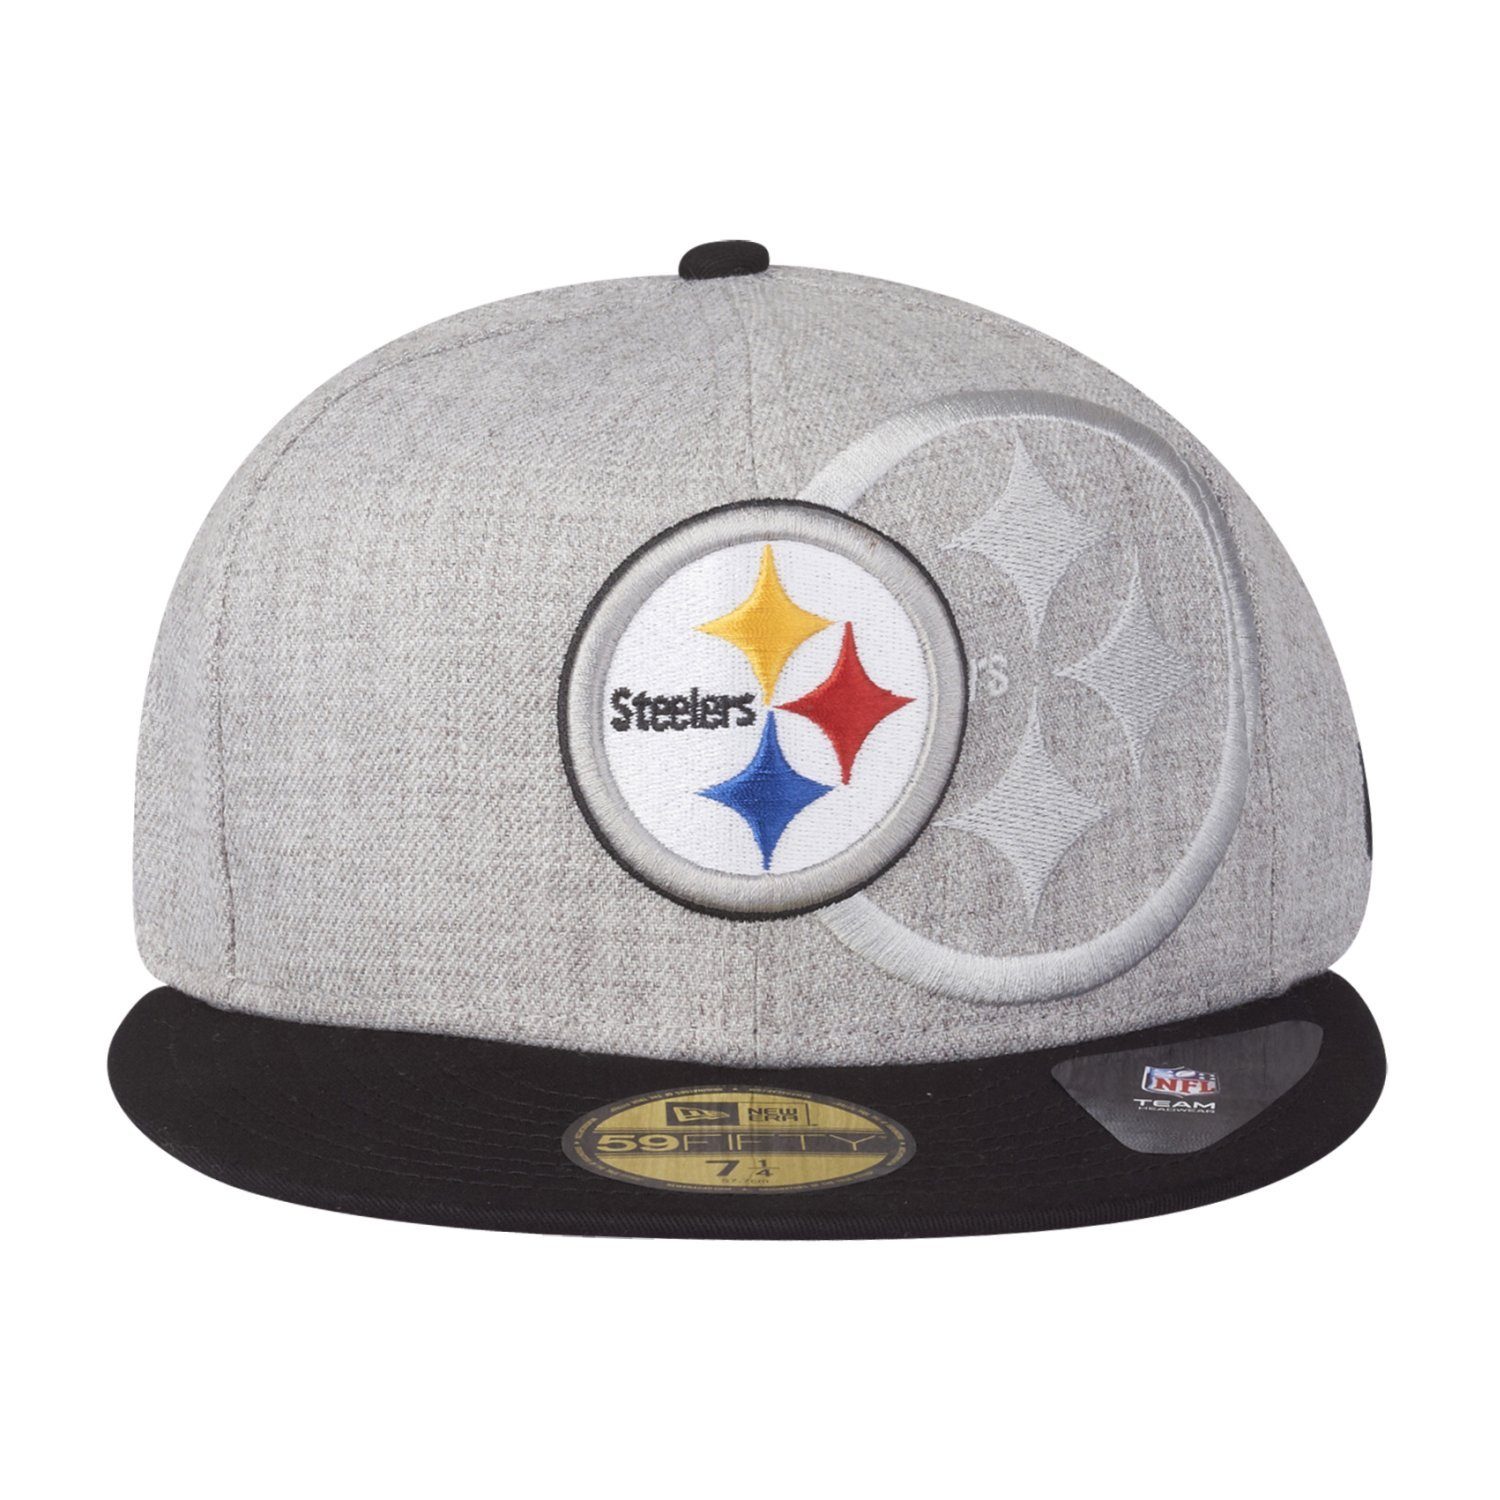 New Pittsburgh Fitted NFL 59Fifty Era SCREENING Steelers Cap